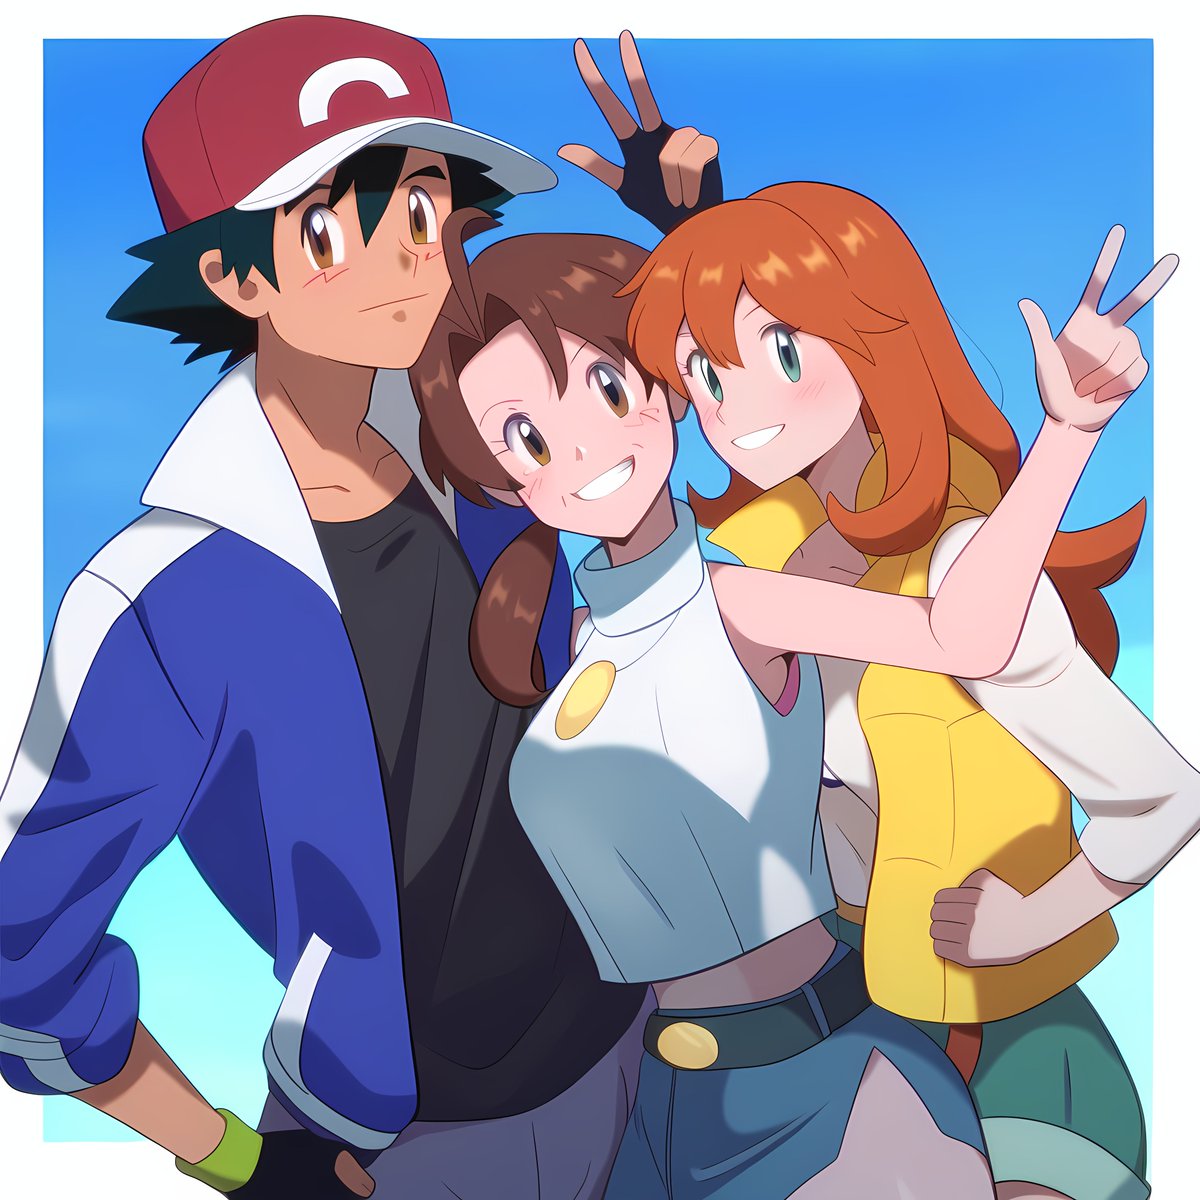 Disregard that last picture, here's a real picture of Delia with her now adult son Ash and his wife Misty.

#pokeshipping #pokemon #anipoke #satokasu #amourshipping #satosere #misty #serena #ashketchum #サトセレ #サトカス #セレナ